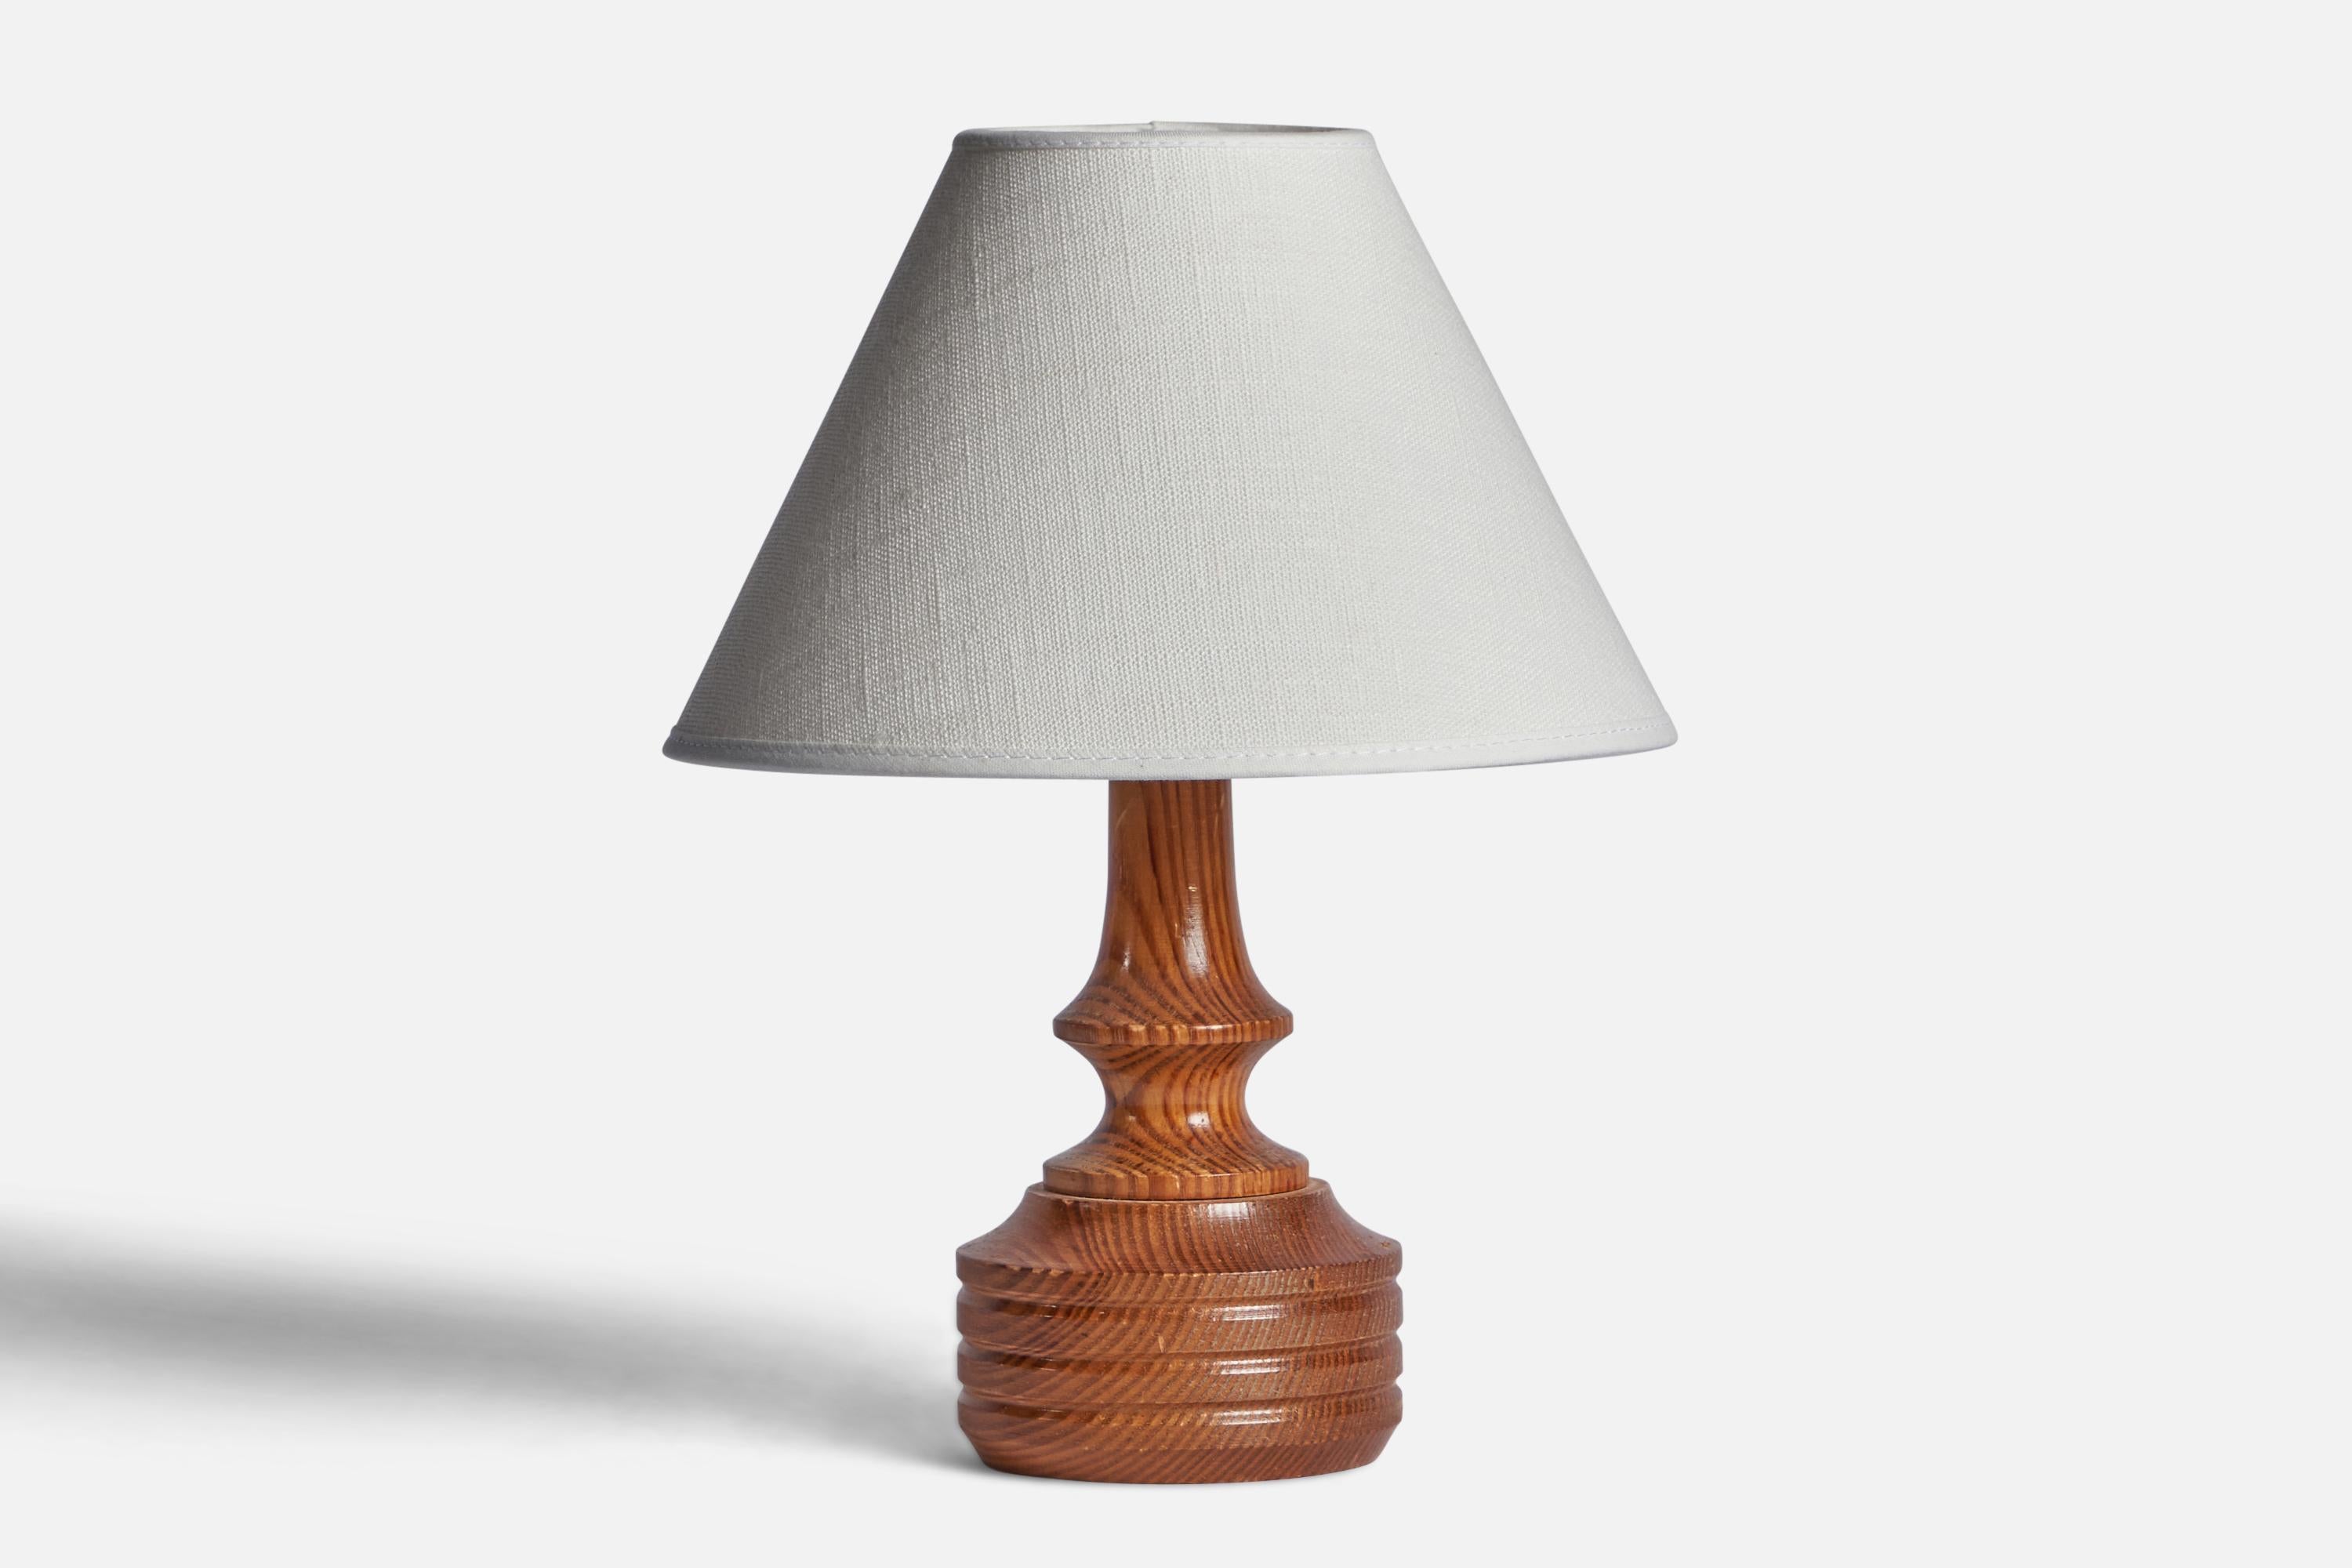 A pine table lamp designed and produced in Sweden, 1960s.

Dimensions of Lamp (inches): 7.85” H x 3.65” Diameter
Dimensions of Shade (inches): 3” Top Diameter x 8” Bottom Diameter x 5” H 
Dimensions of Lamp with Shade (inches): 10.85” H x 8”